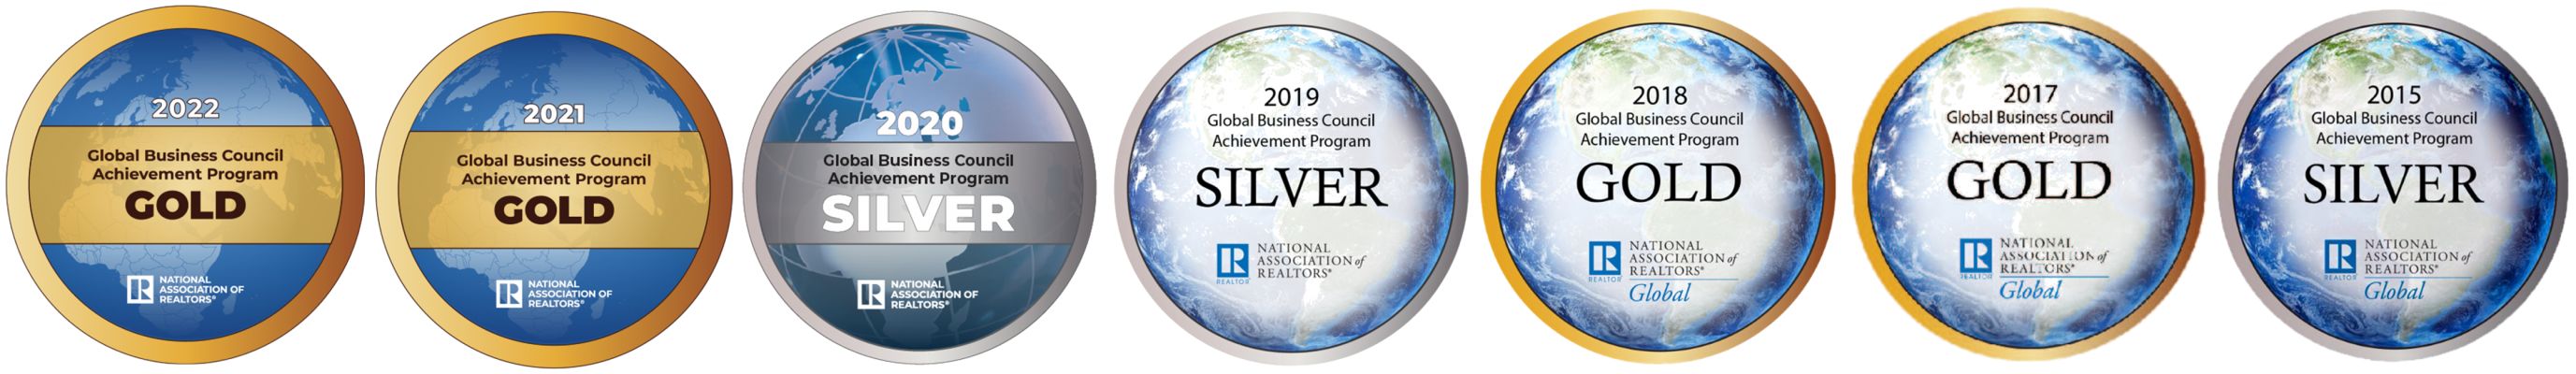 NAR Global Business Achievement Awards for 2015, 2017, 2018, 2019, 2020